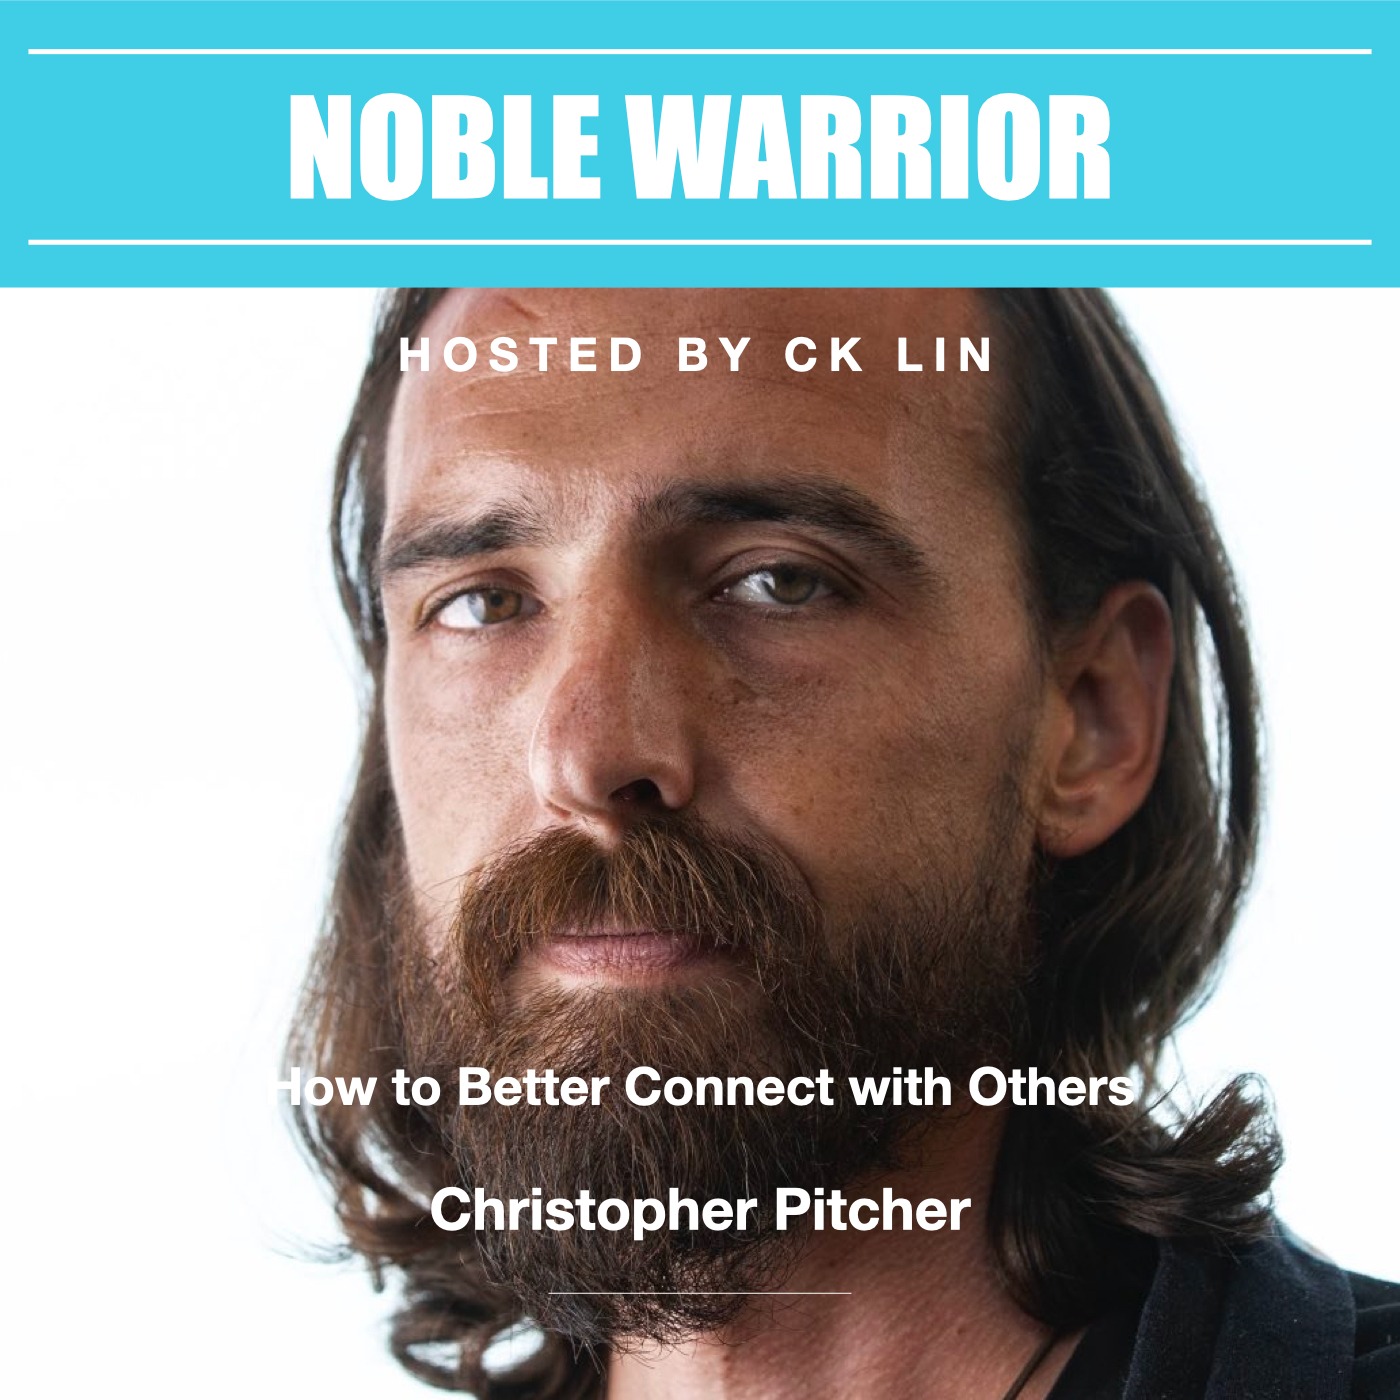 004 Christopher Pitcher: How to Better Connect with Others Image